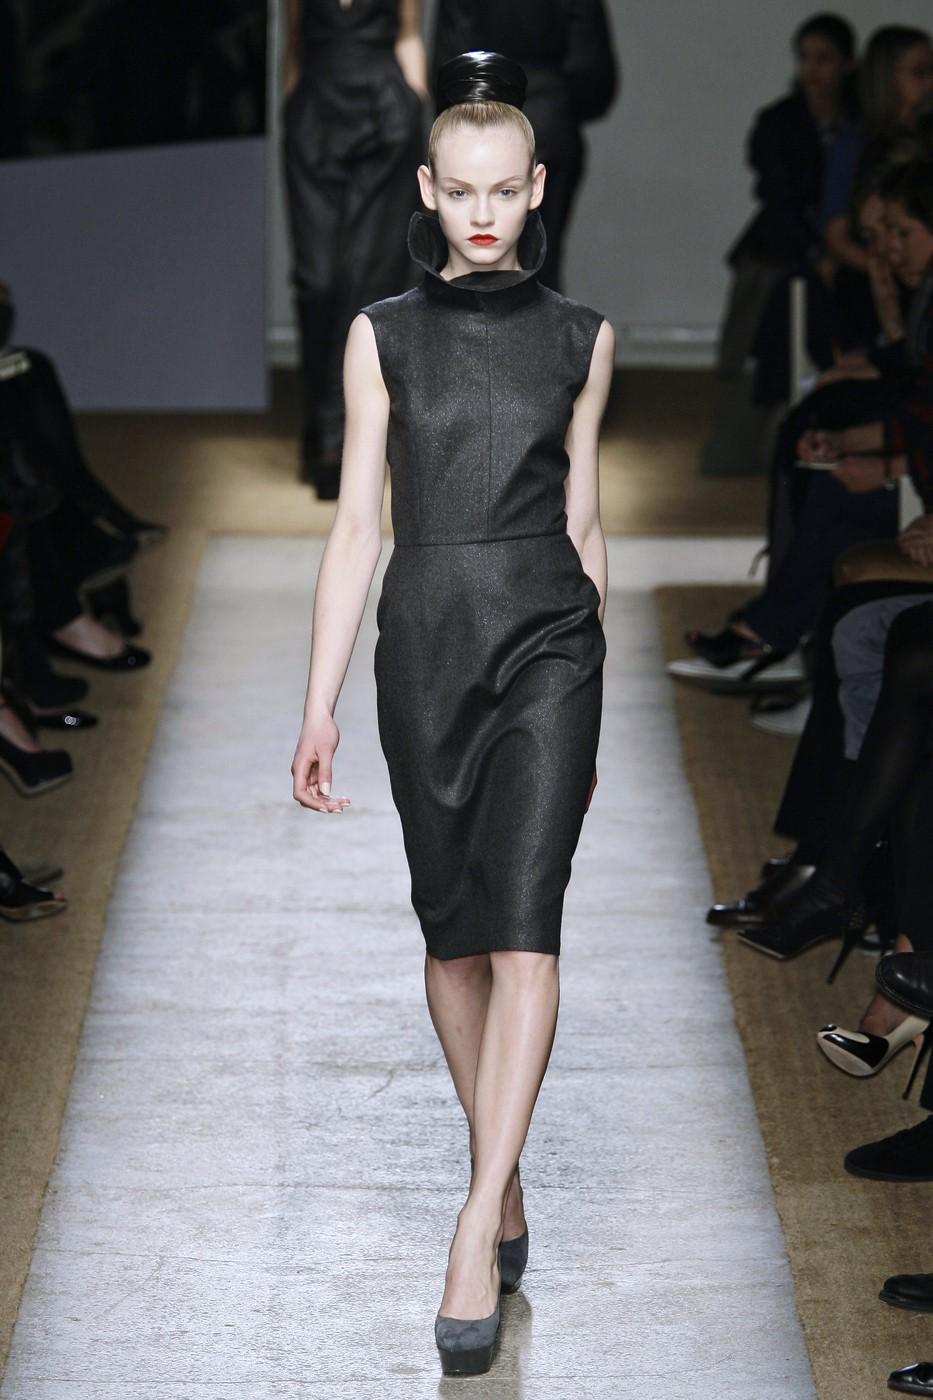 Yves Saint Laurent
Fall Winter 2009
Brand New Without Tags
$2150
Butter Soft Runway Wool Lurex Dress
FR42  Roughly U.S.  6
Charcoal & Metallic Lurex 
Zips Up the Back
Hook and Eye Neck
Fully Lined

Bust: 34